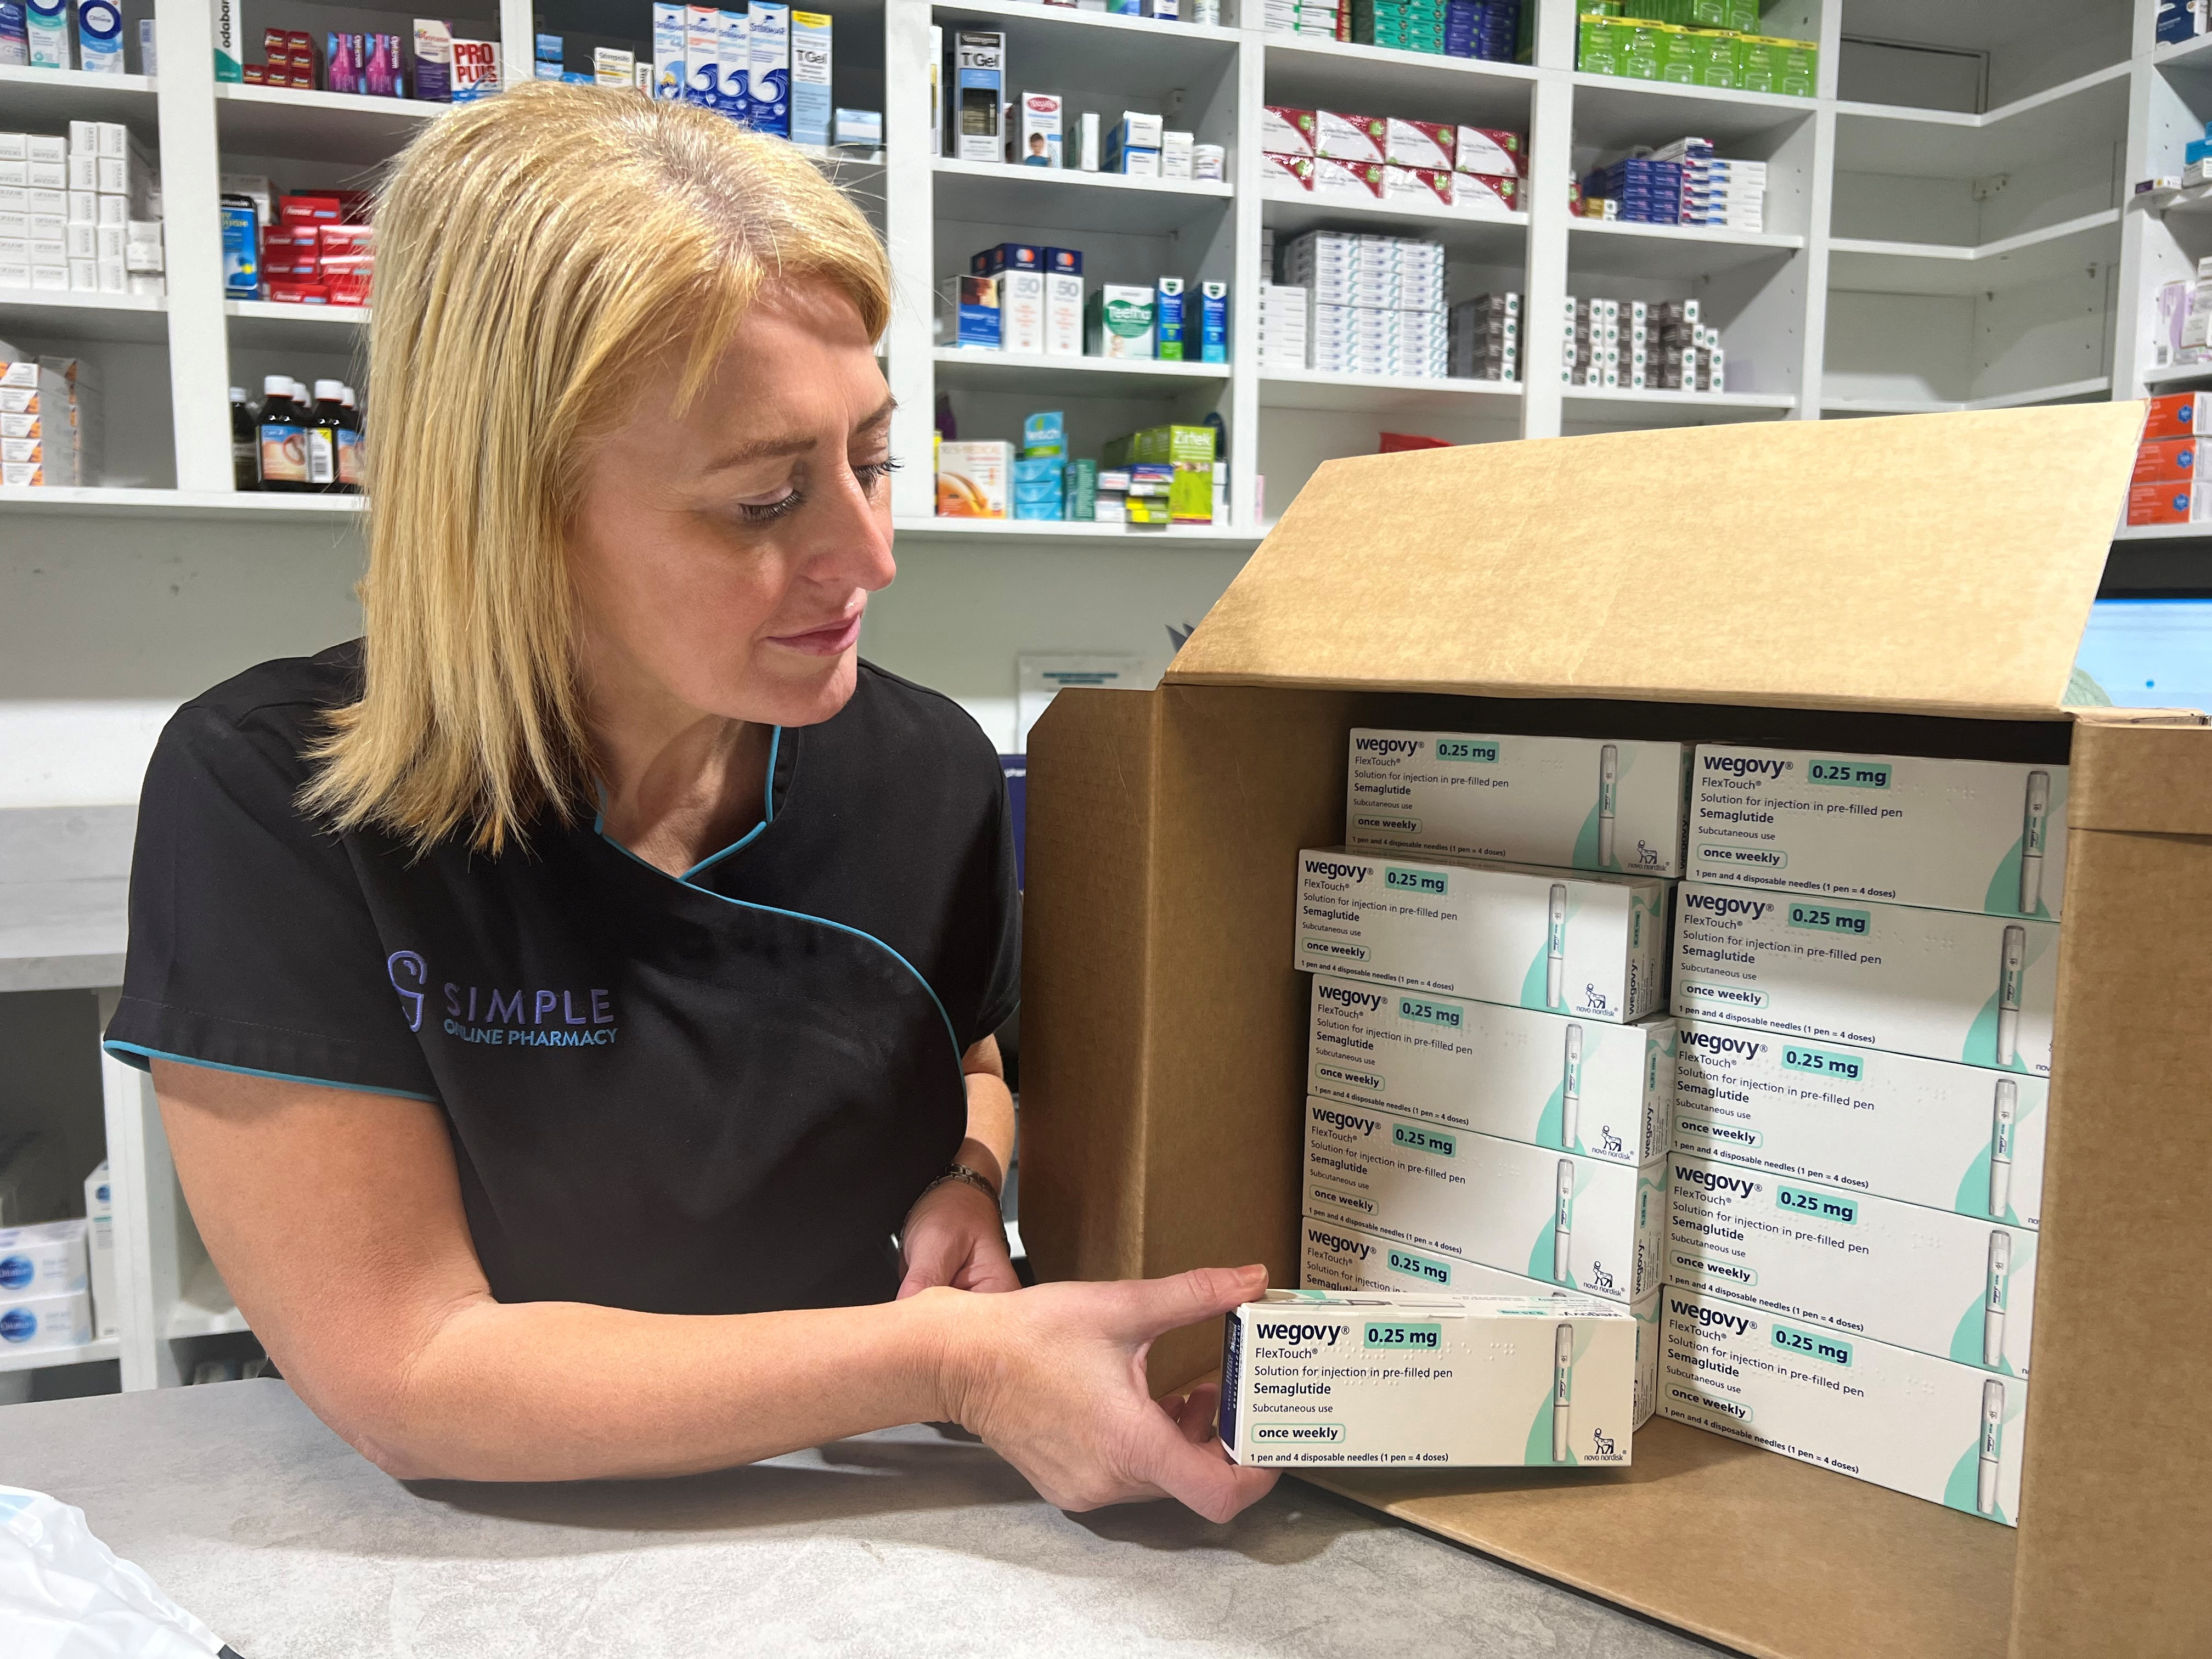 Wegovy lands in UK as private sellers receive delivery of weight loss drug